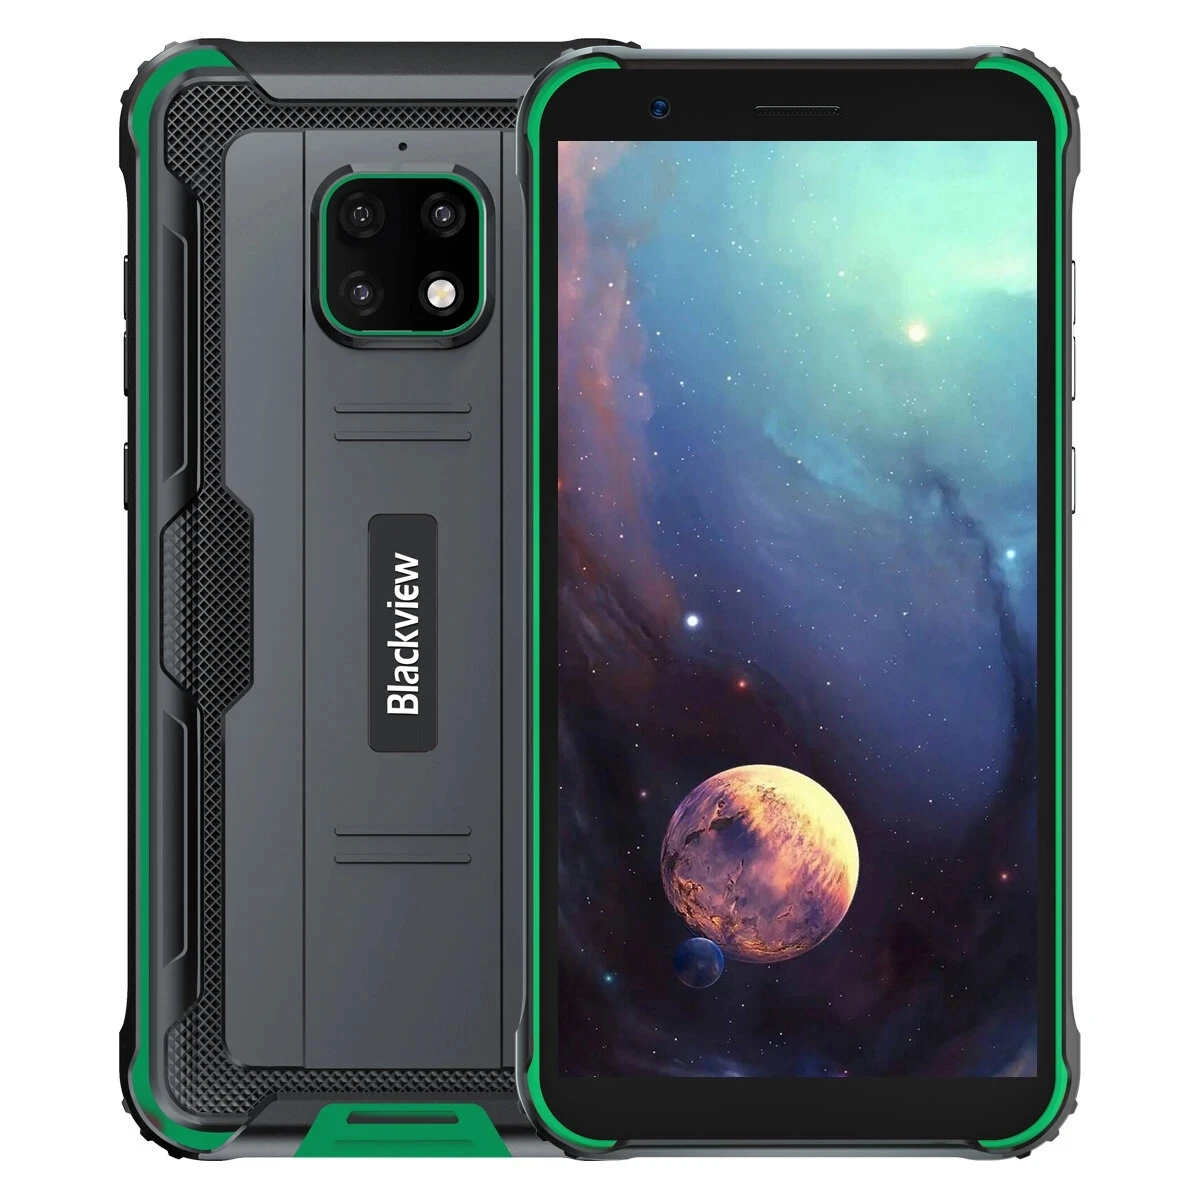 

Blackview BV4900 IP68 Mobile Phone Quad Core Android 10 3GB+32GB 8.0MP 5580mAh 5.7 Inch NFC 4G LTE Rugged Waterproof Smartphone